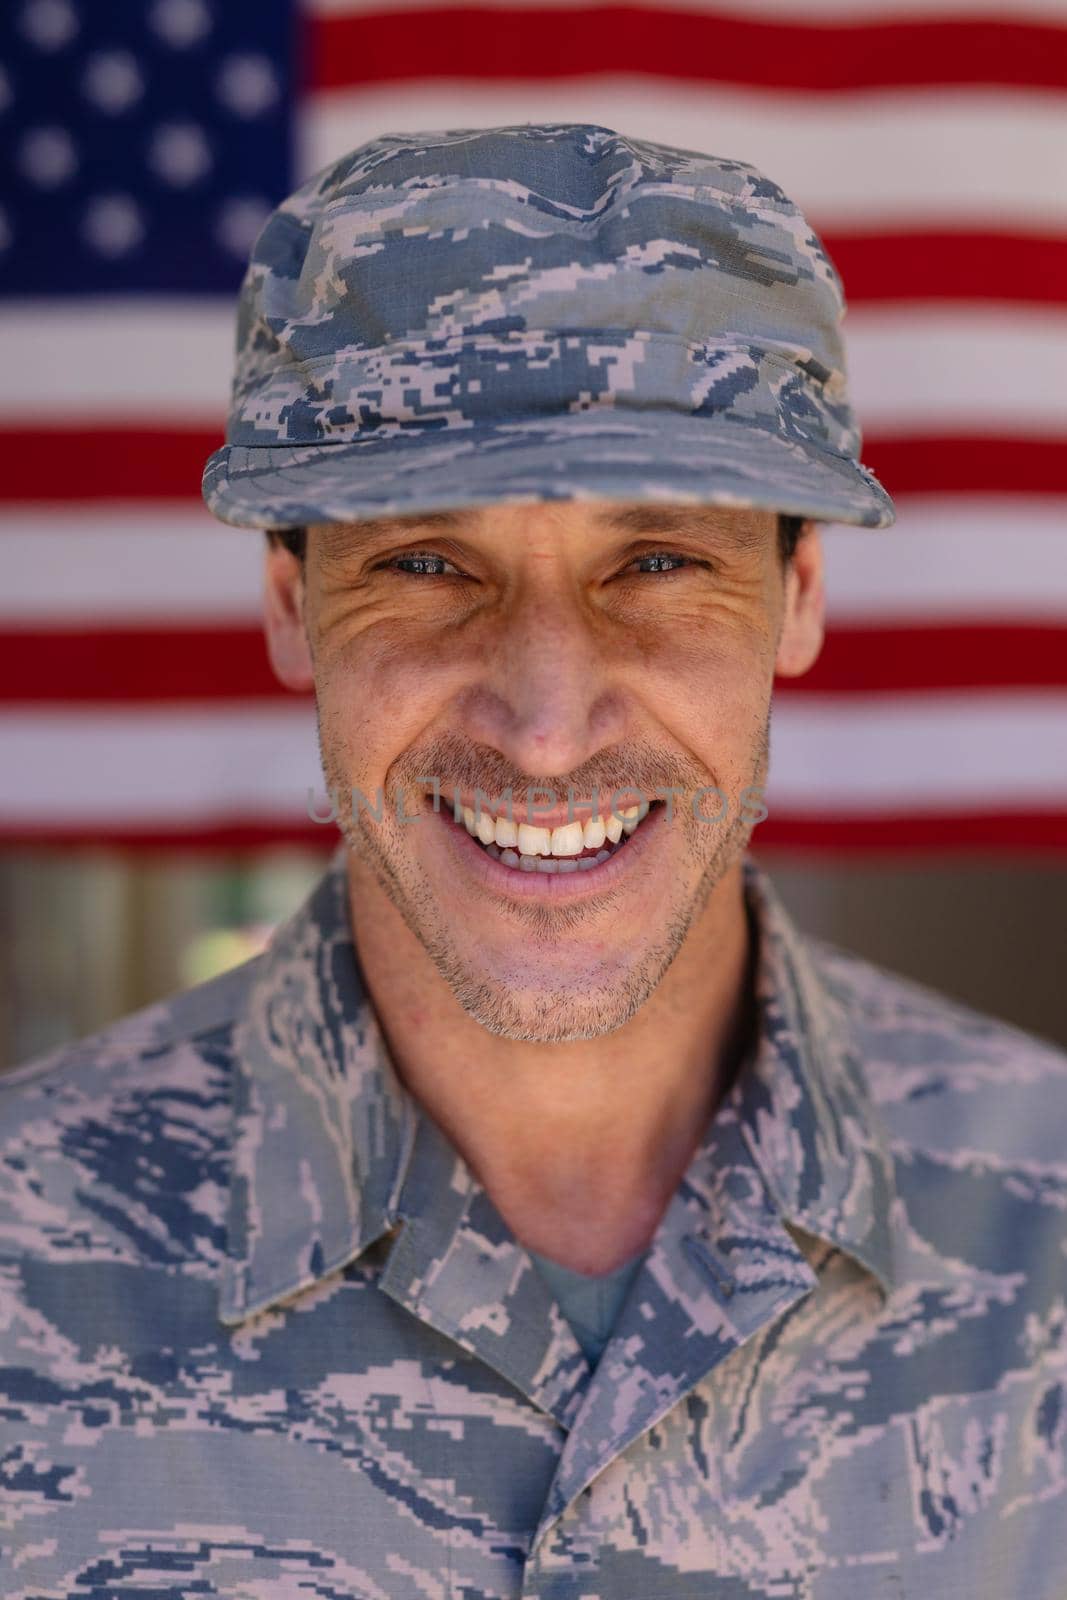 Portrait of smiling caucasian army soldier wearing cap and camouflage uniform against usa flag. people, patriotism and identity concept, unaltered.